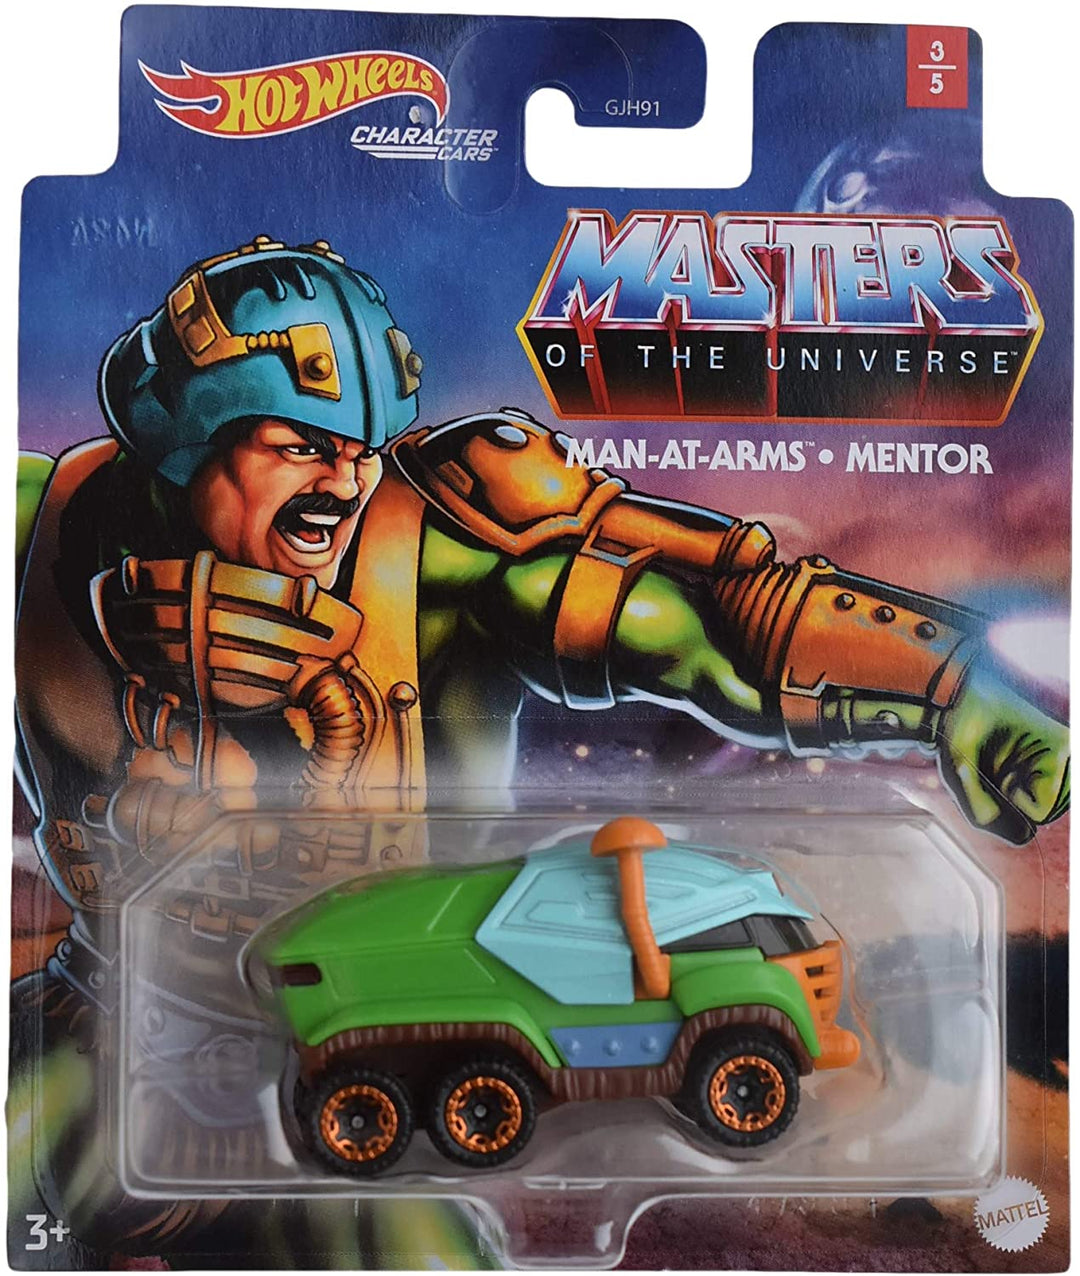 Character Cars Hot Wheels Masters of The Universe - Auto Veicolo - Men at Arms Mentor - Die-cast Scala 1:64